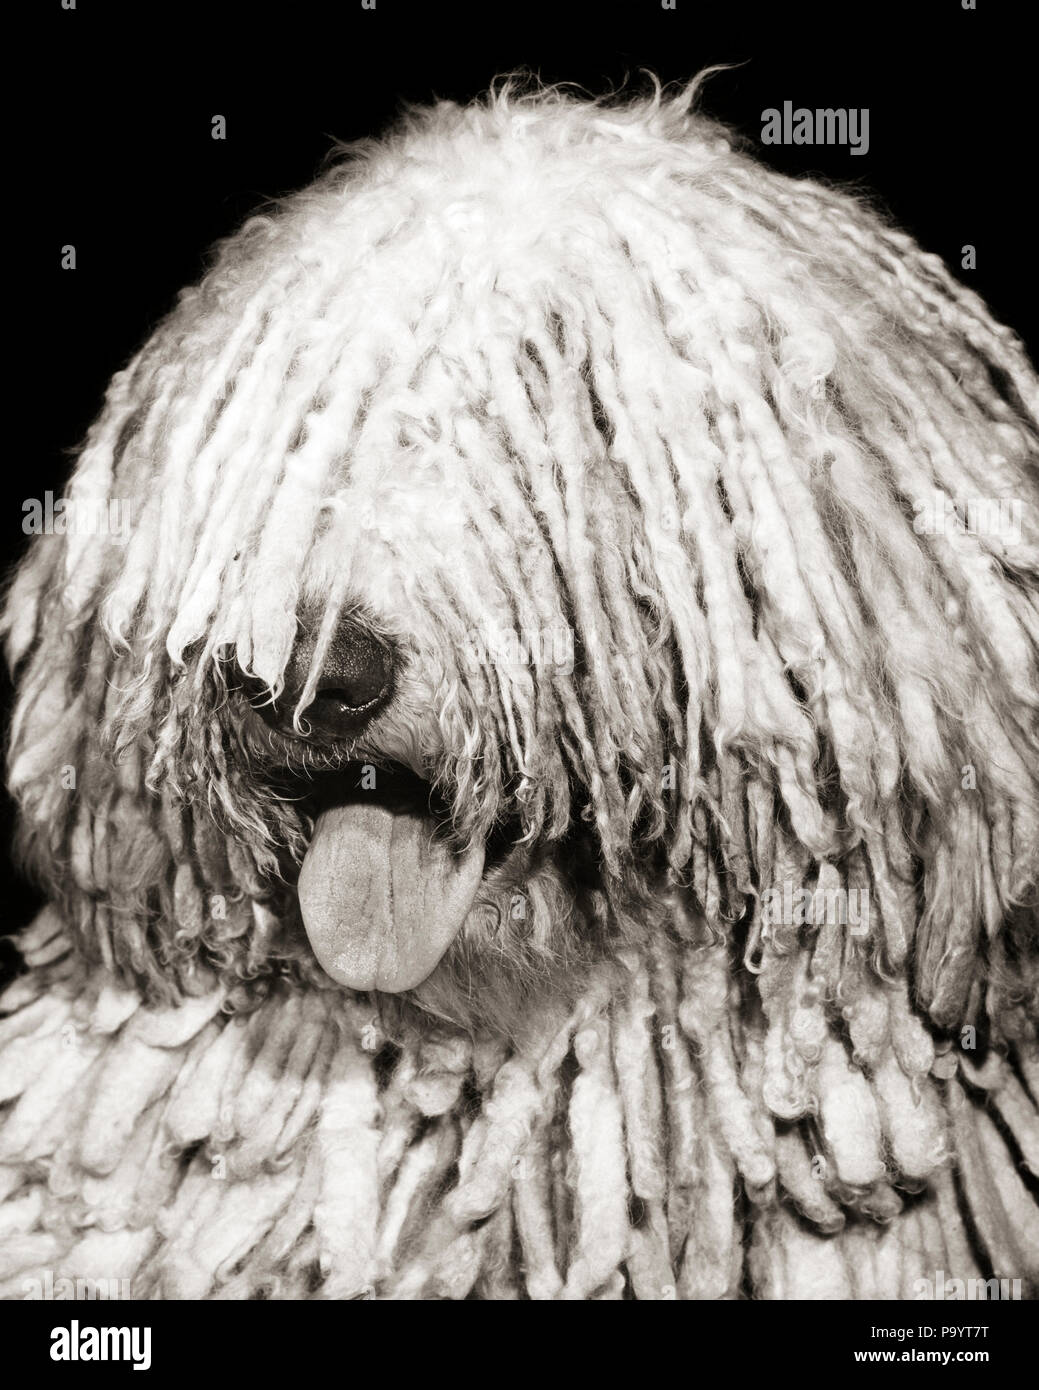 1950s KOMONDOR DOG HEAD WITH TONGUE OUT COVERED IN LONG CORDED MATTED COAT LOOKS LIKE DREADLOCKS HUNGARIAN SHEEPDOG  - d6120 HAR001 HARS OLD FASHIONED Stock Photo